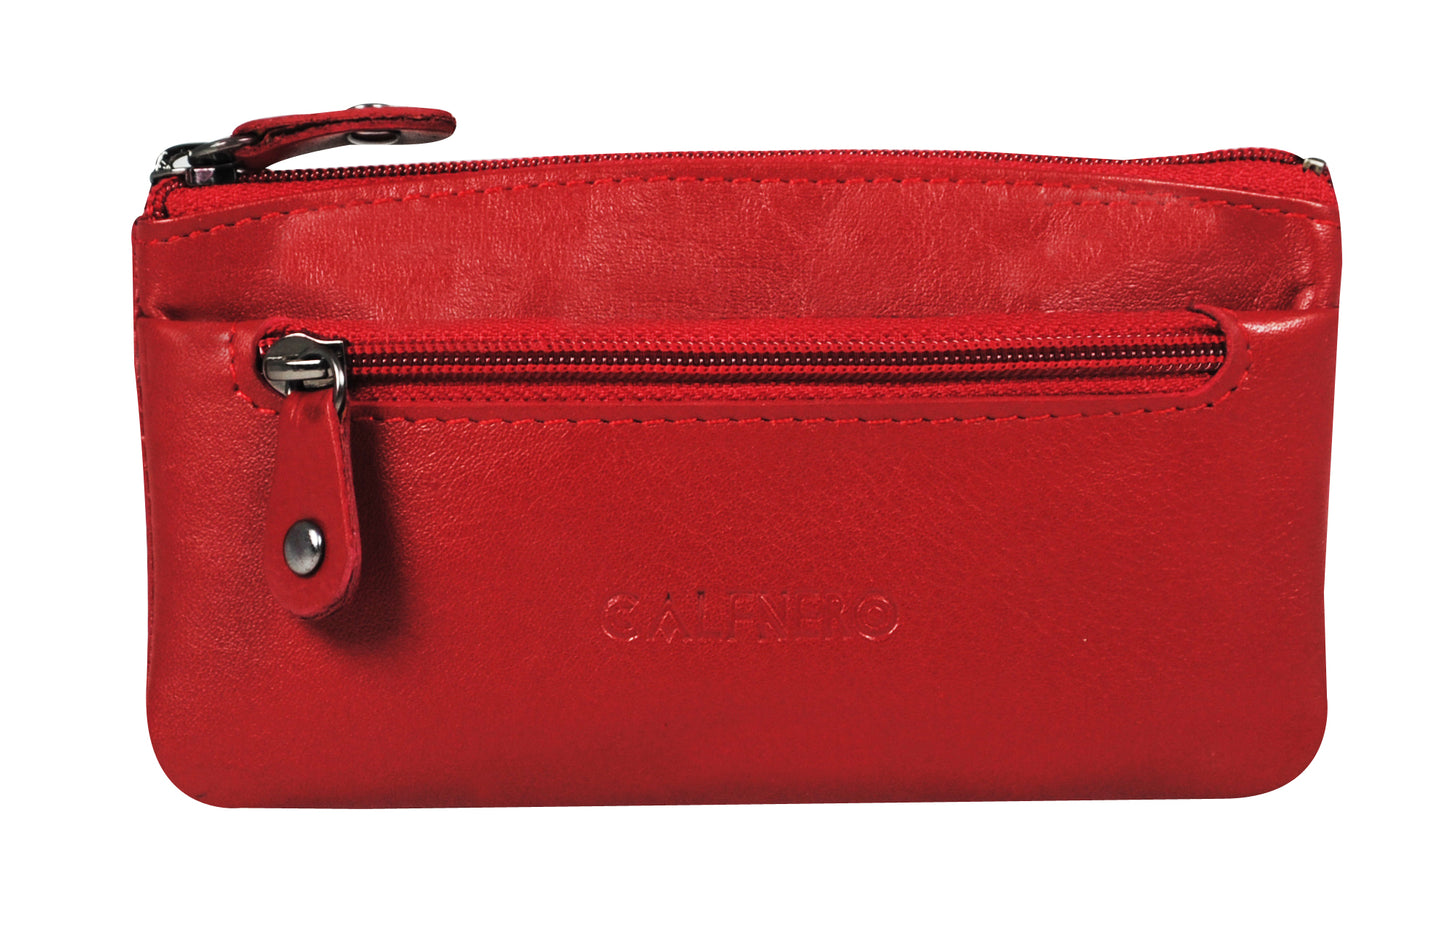 Calfnero Genuine Leather Key Case,Coin Wallet (1989-Red)